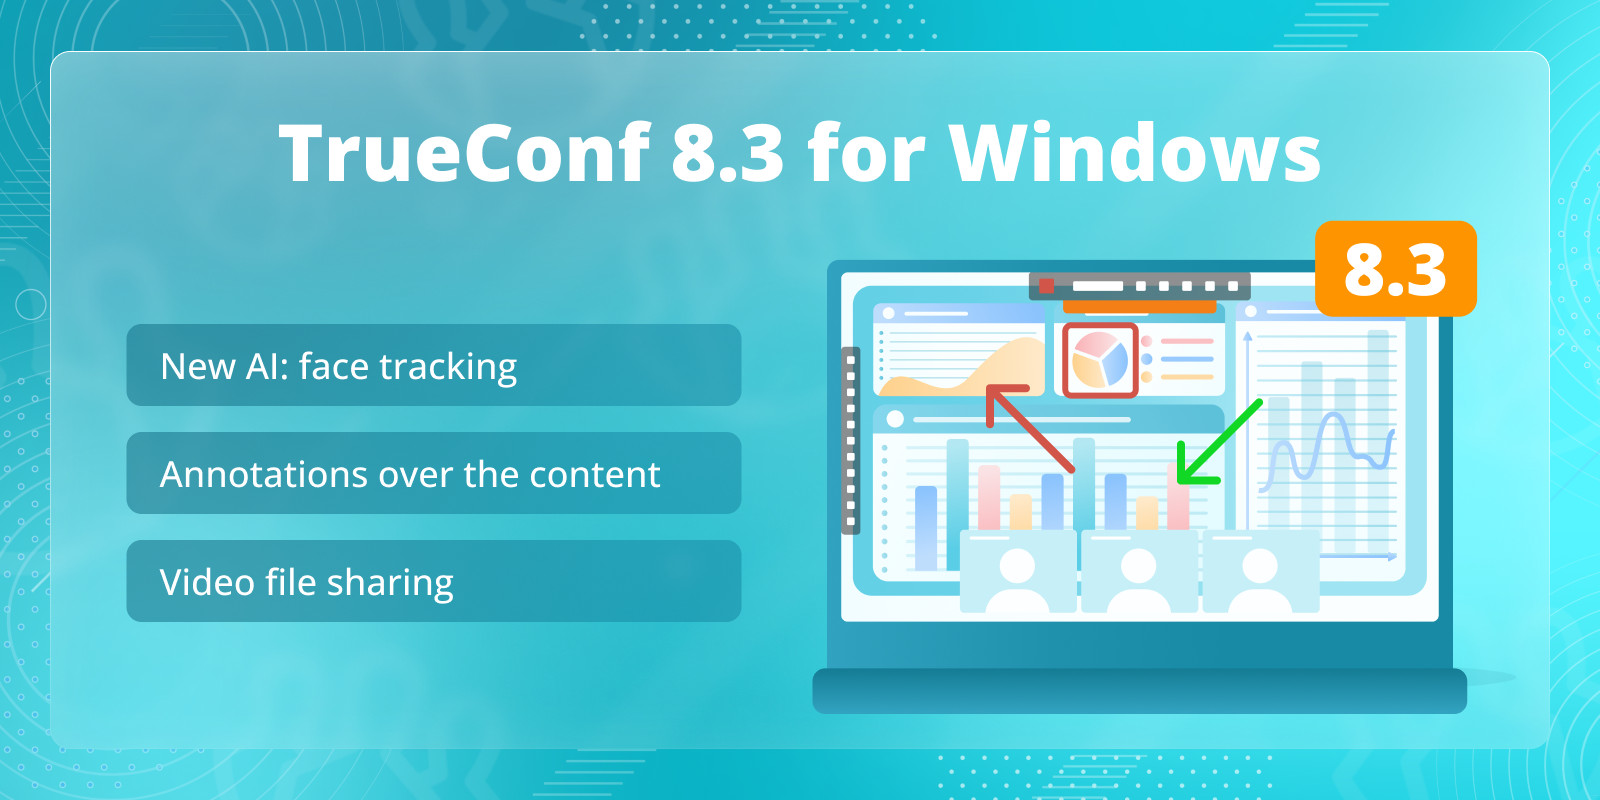 TrueConf 8.3 for Windows: New AI-based feature, annotations over the content, and video file sharing 1